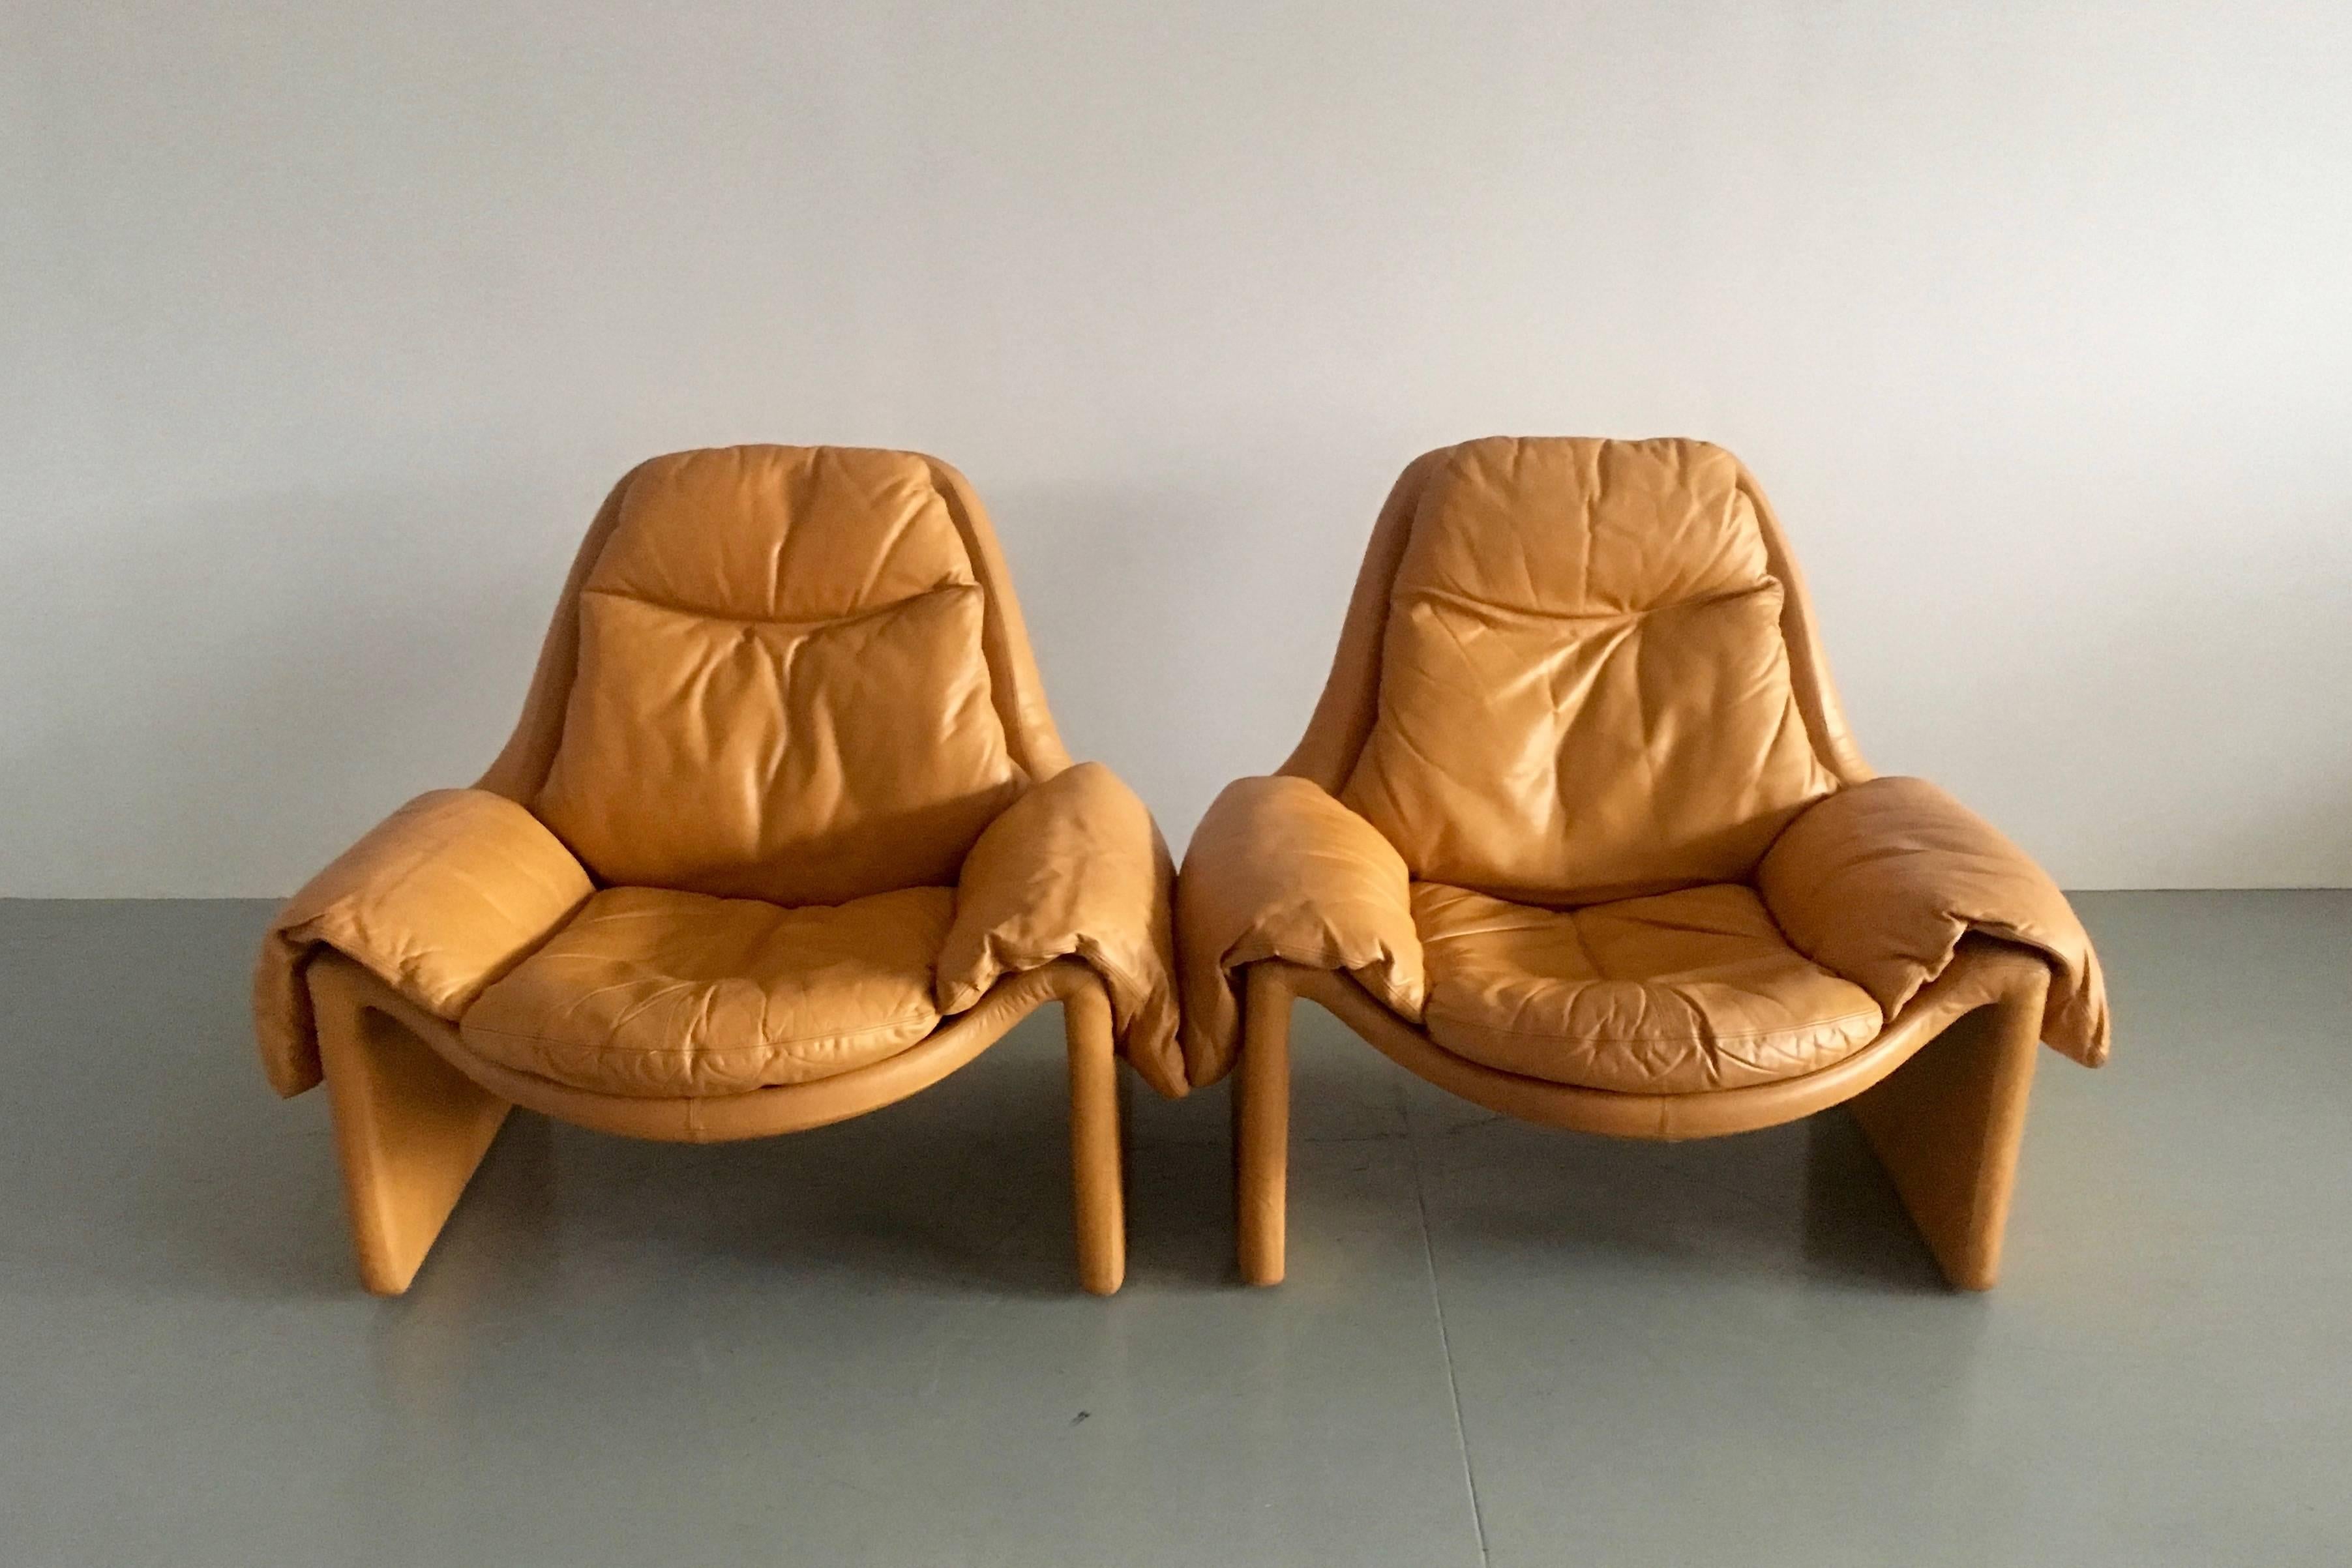 Leather Proposals 2 Lounge Chairs with Ottoman by Vittorio Introini for Saporiti, 1960s